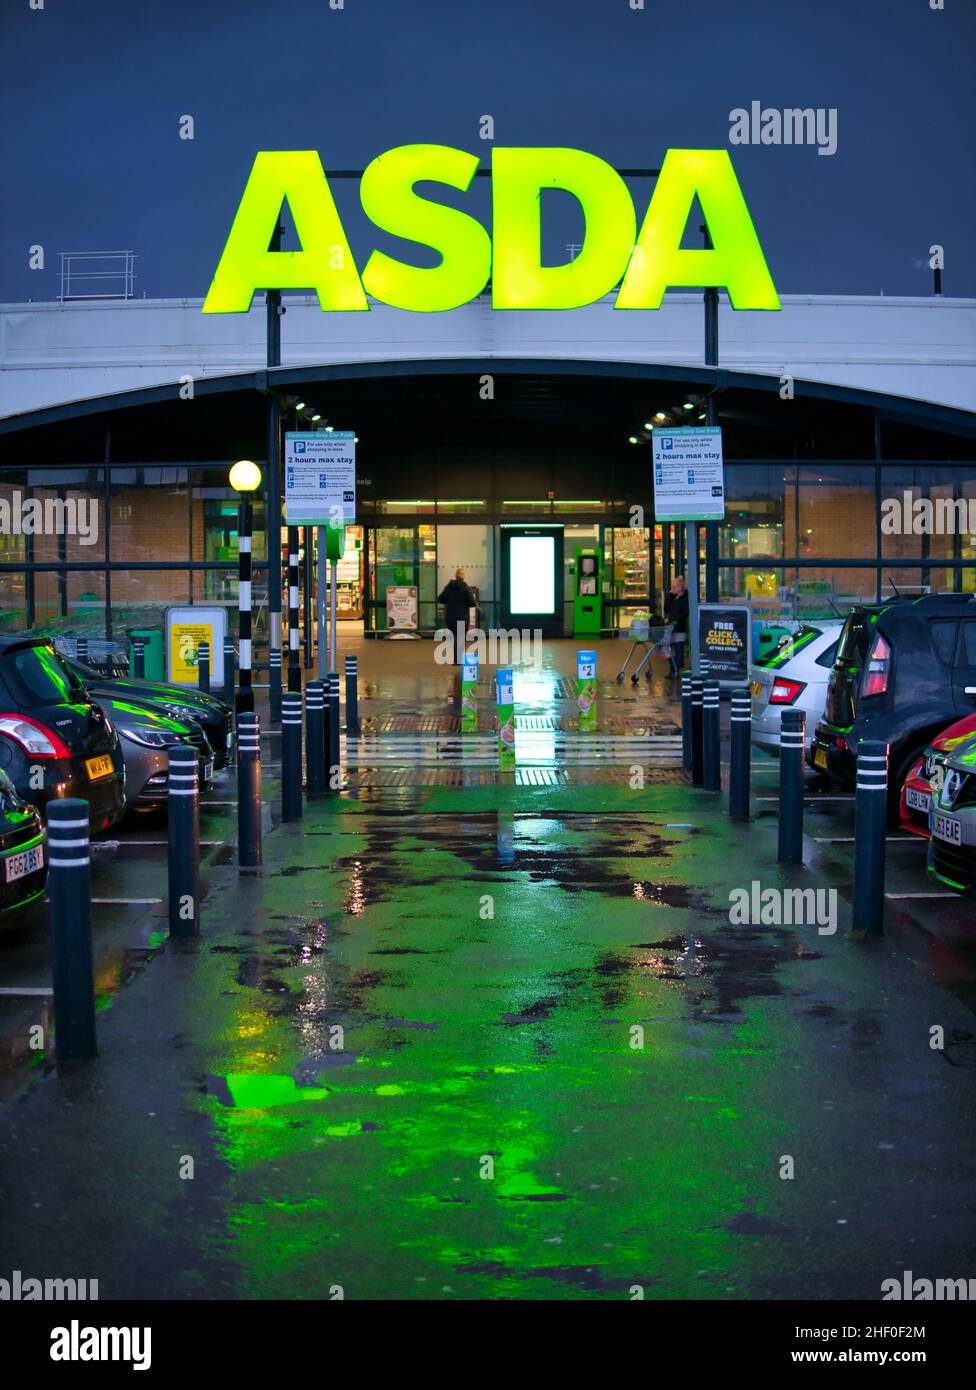 The car park and frontage of the a store of the ASDA British supermarket chain, located in a residential area in the North of England. Stock Photo